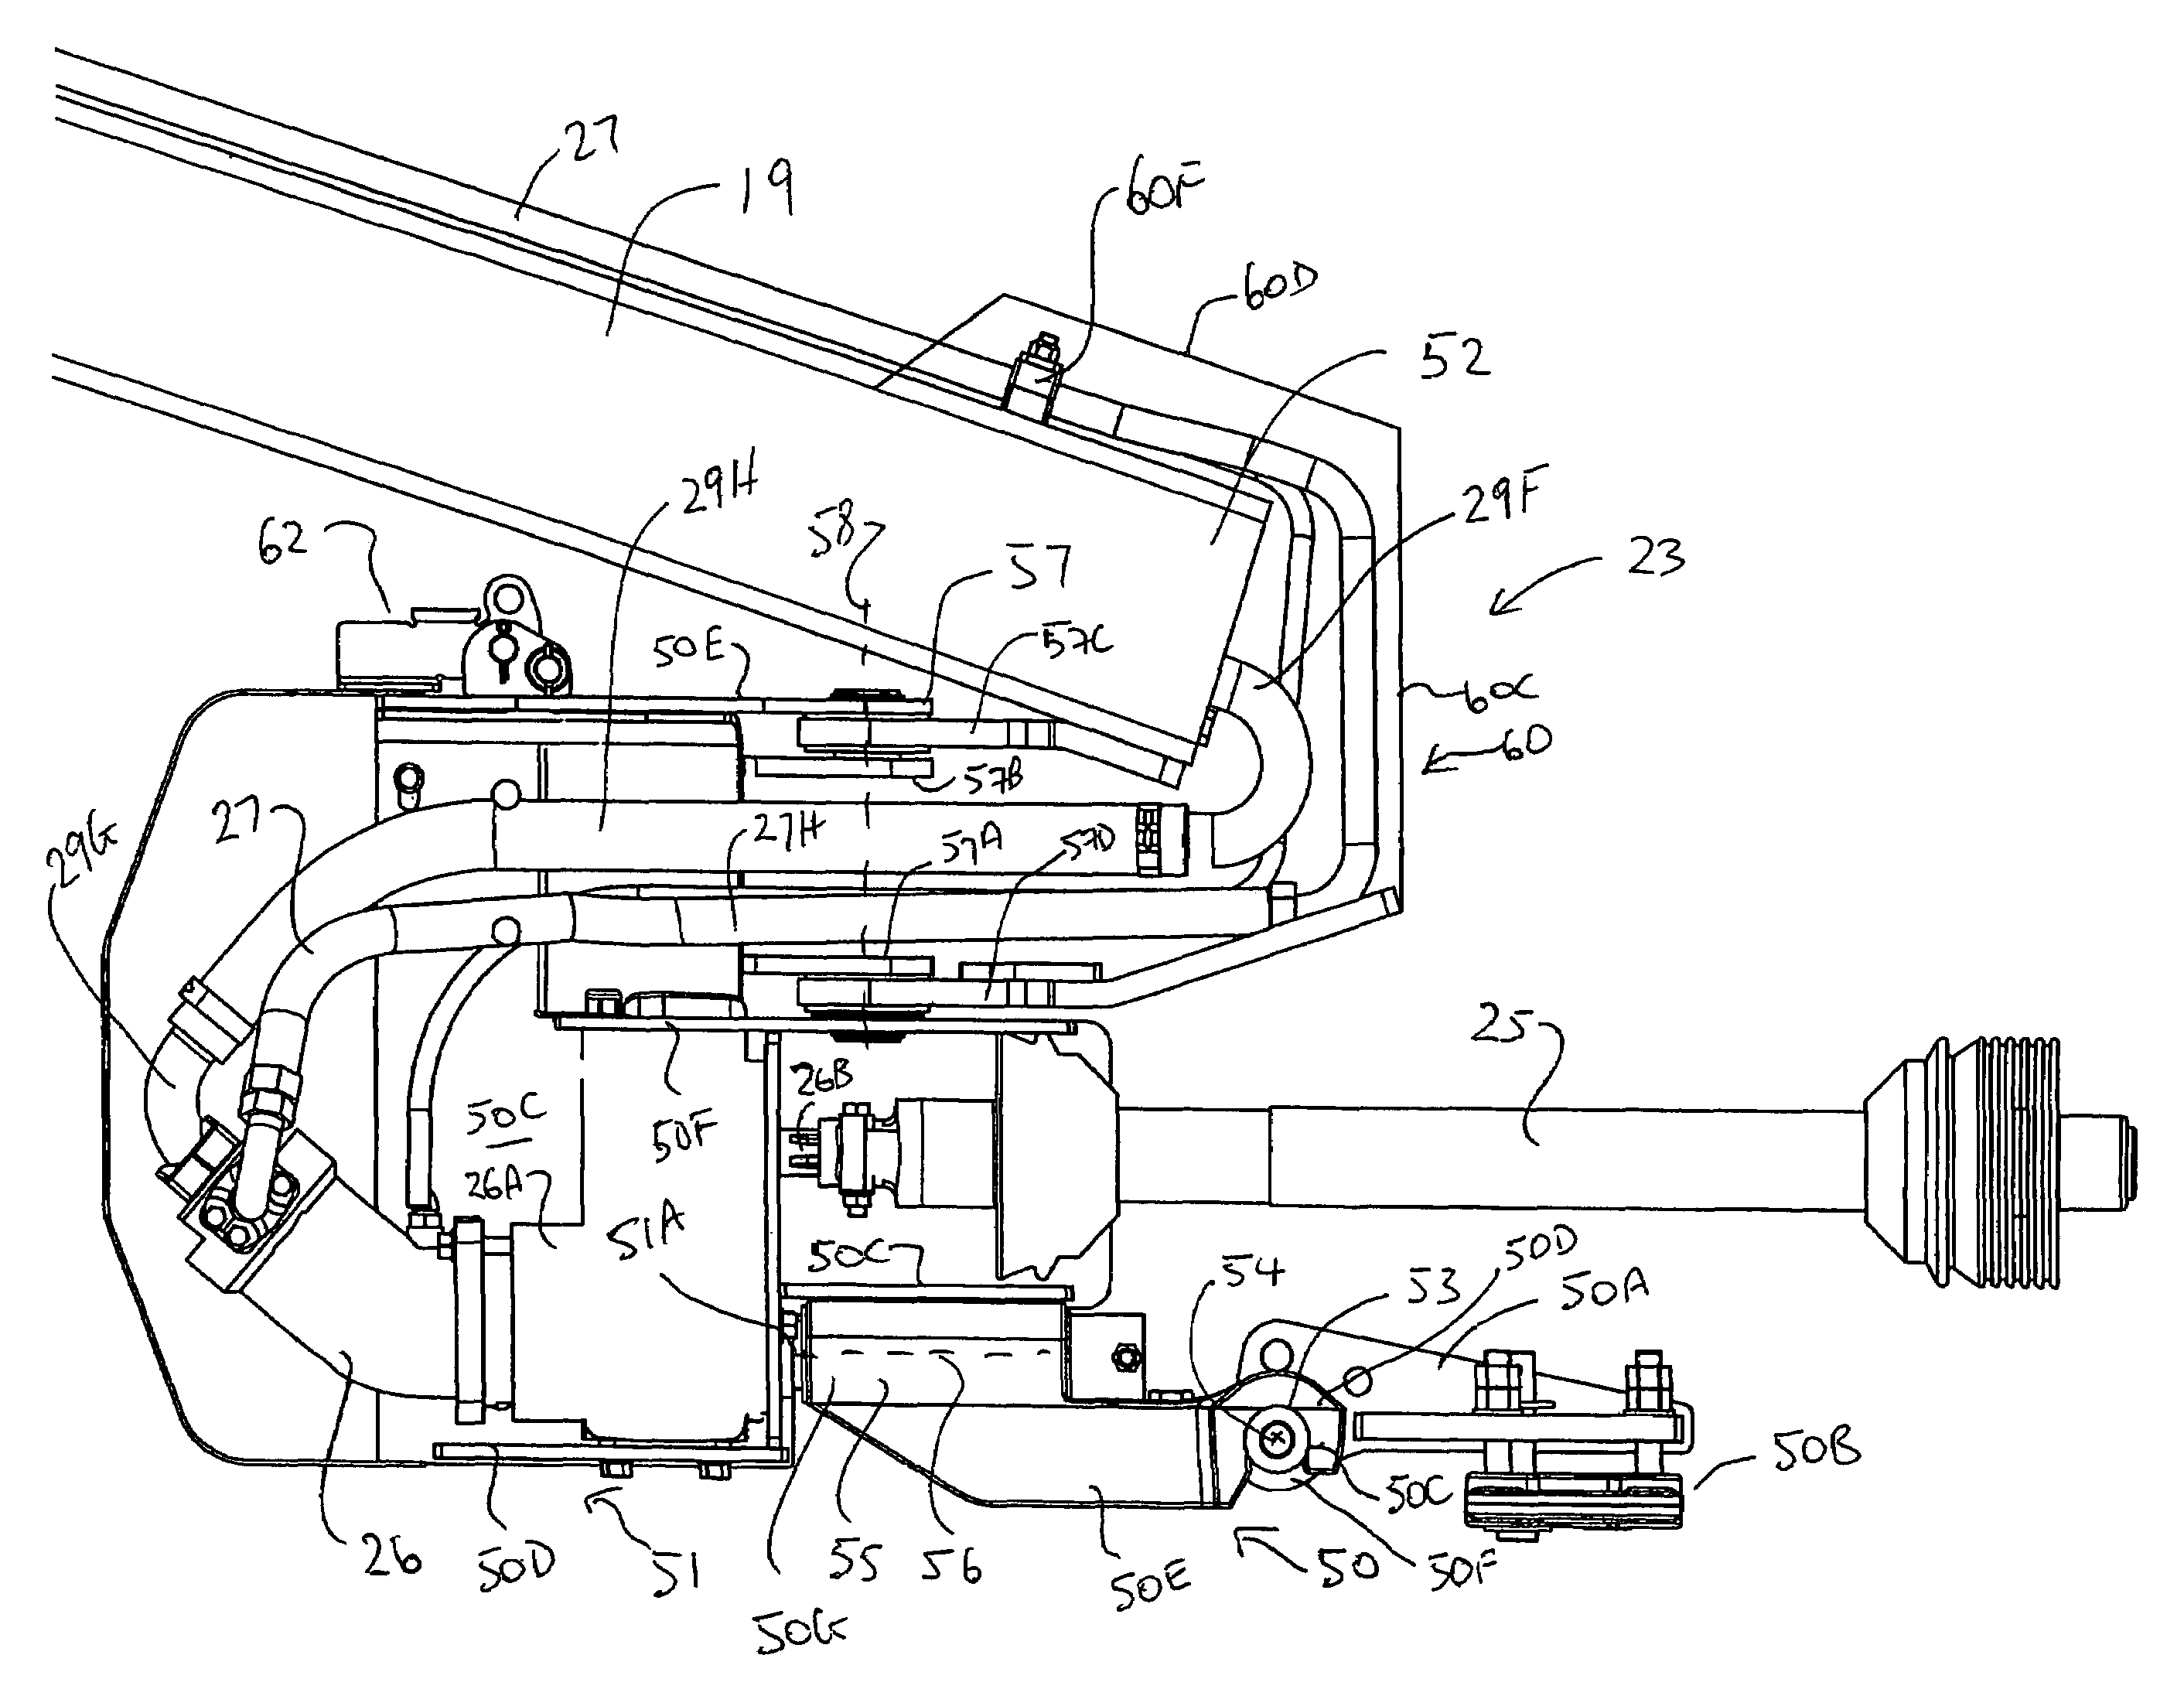 Connection of the hitch arm of a pull-type crop harvesting machine to a tractor